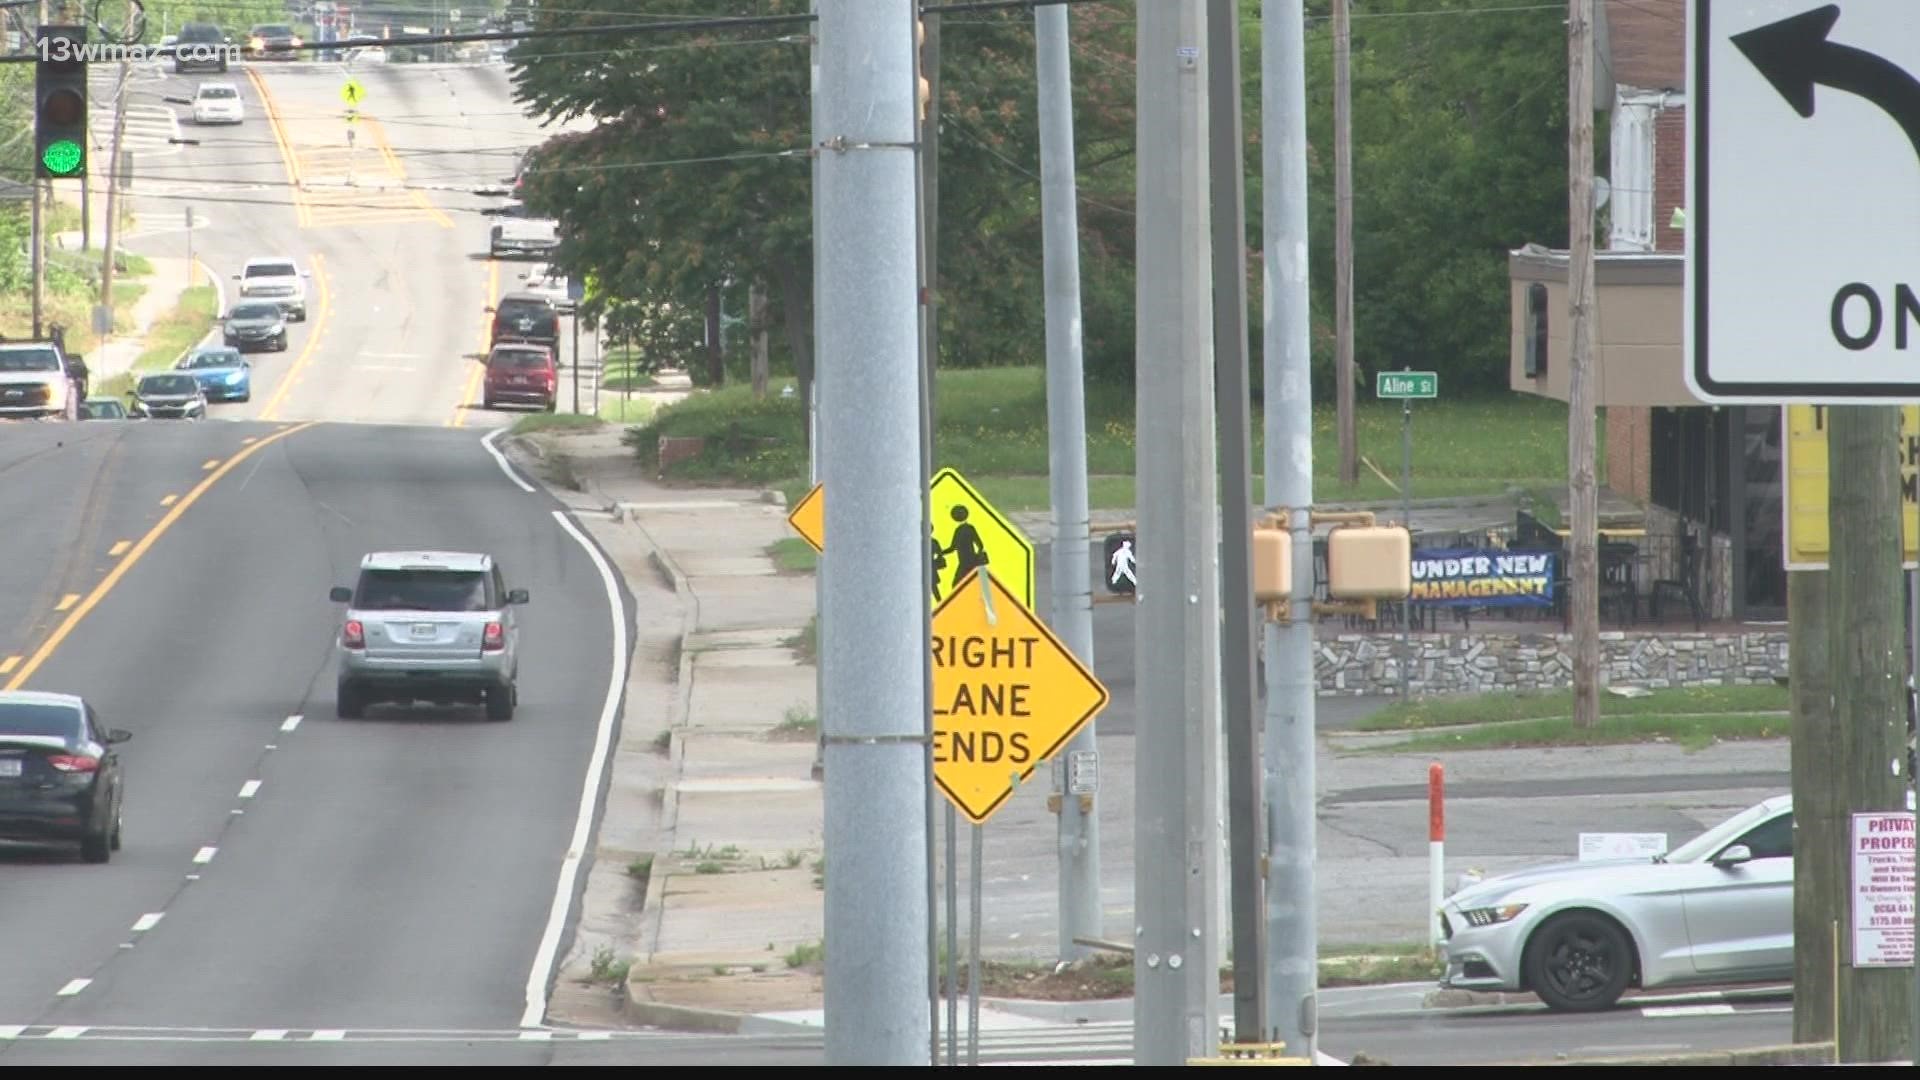 Bibb County created the Pedestrian Safety Review Board several years ago due to the high number of pedestrian deaths.